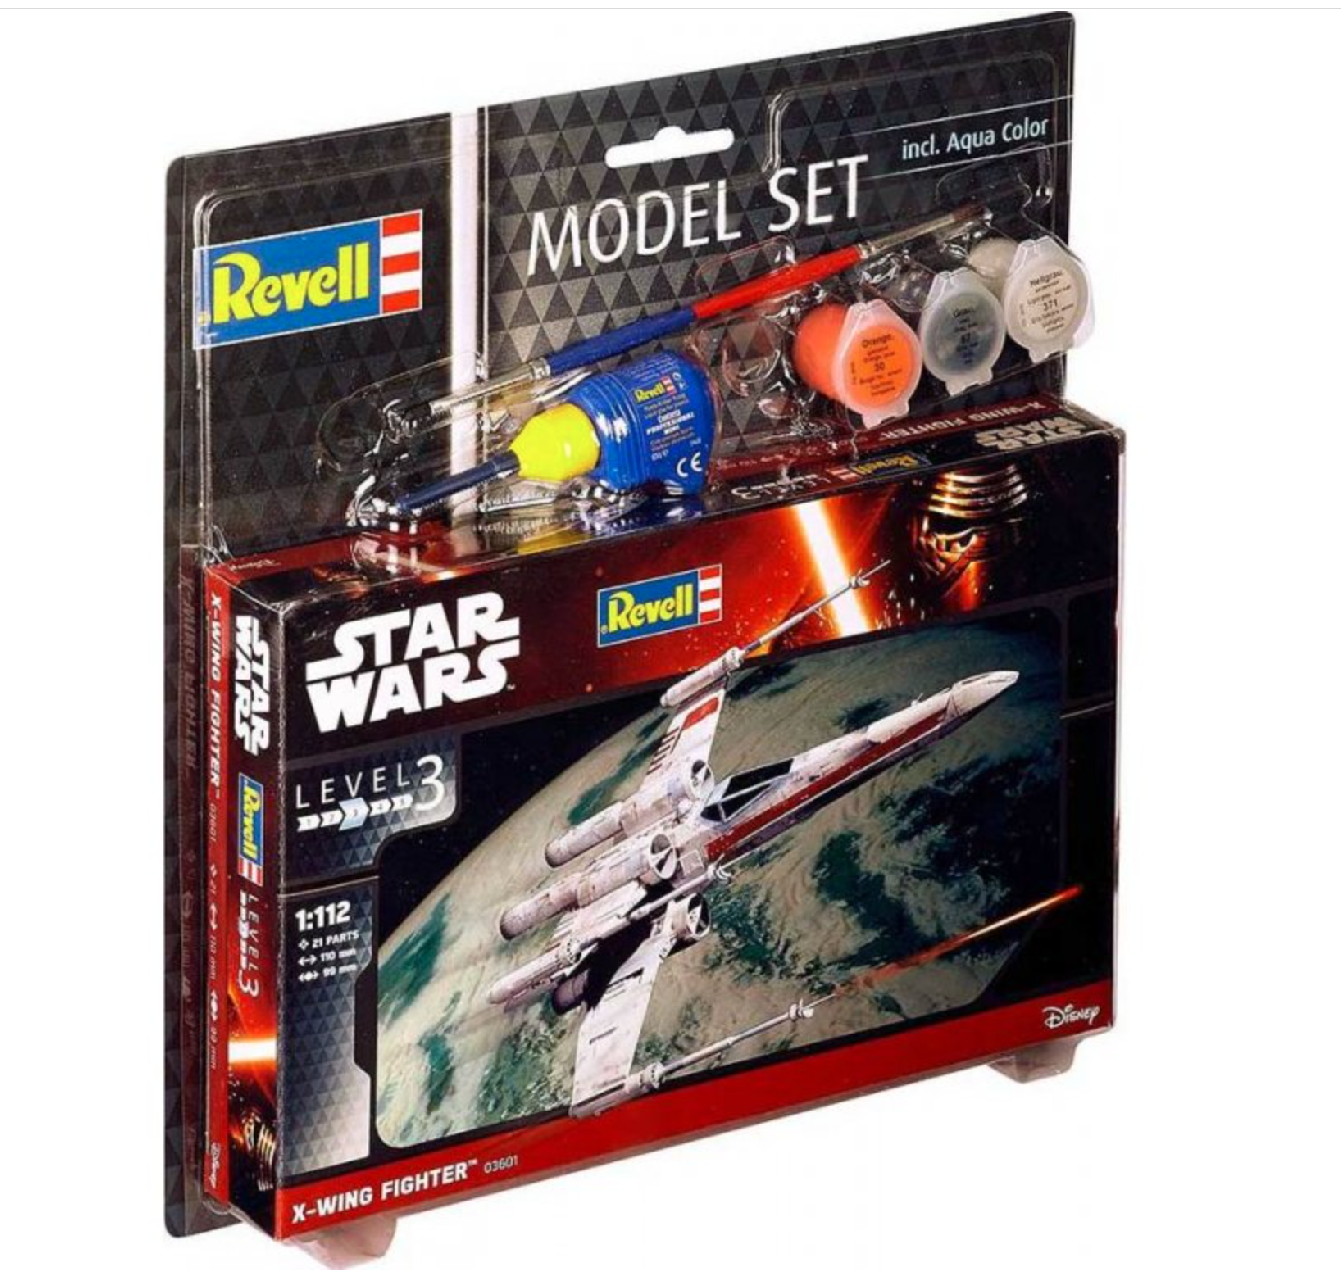 Revell Star Wars - X-Wing Fighter (1:112) SET